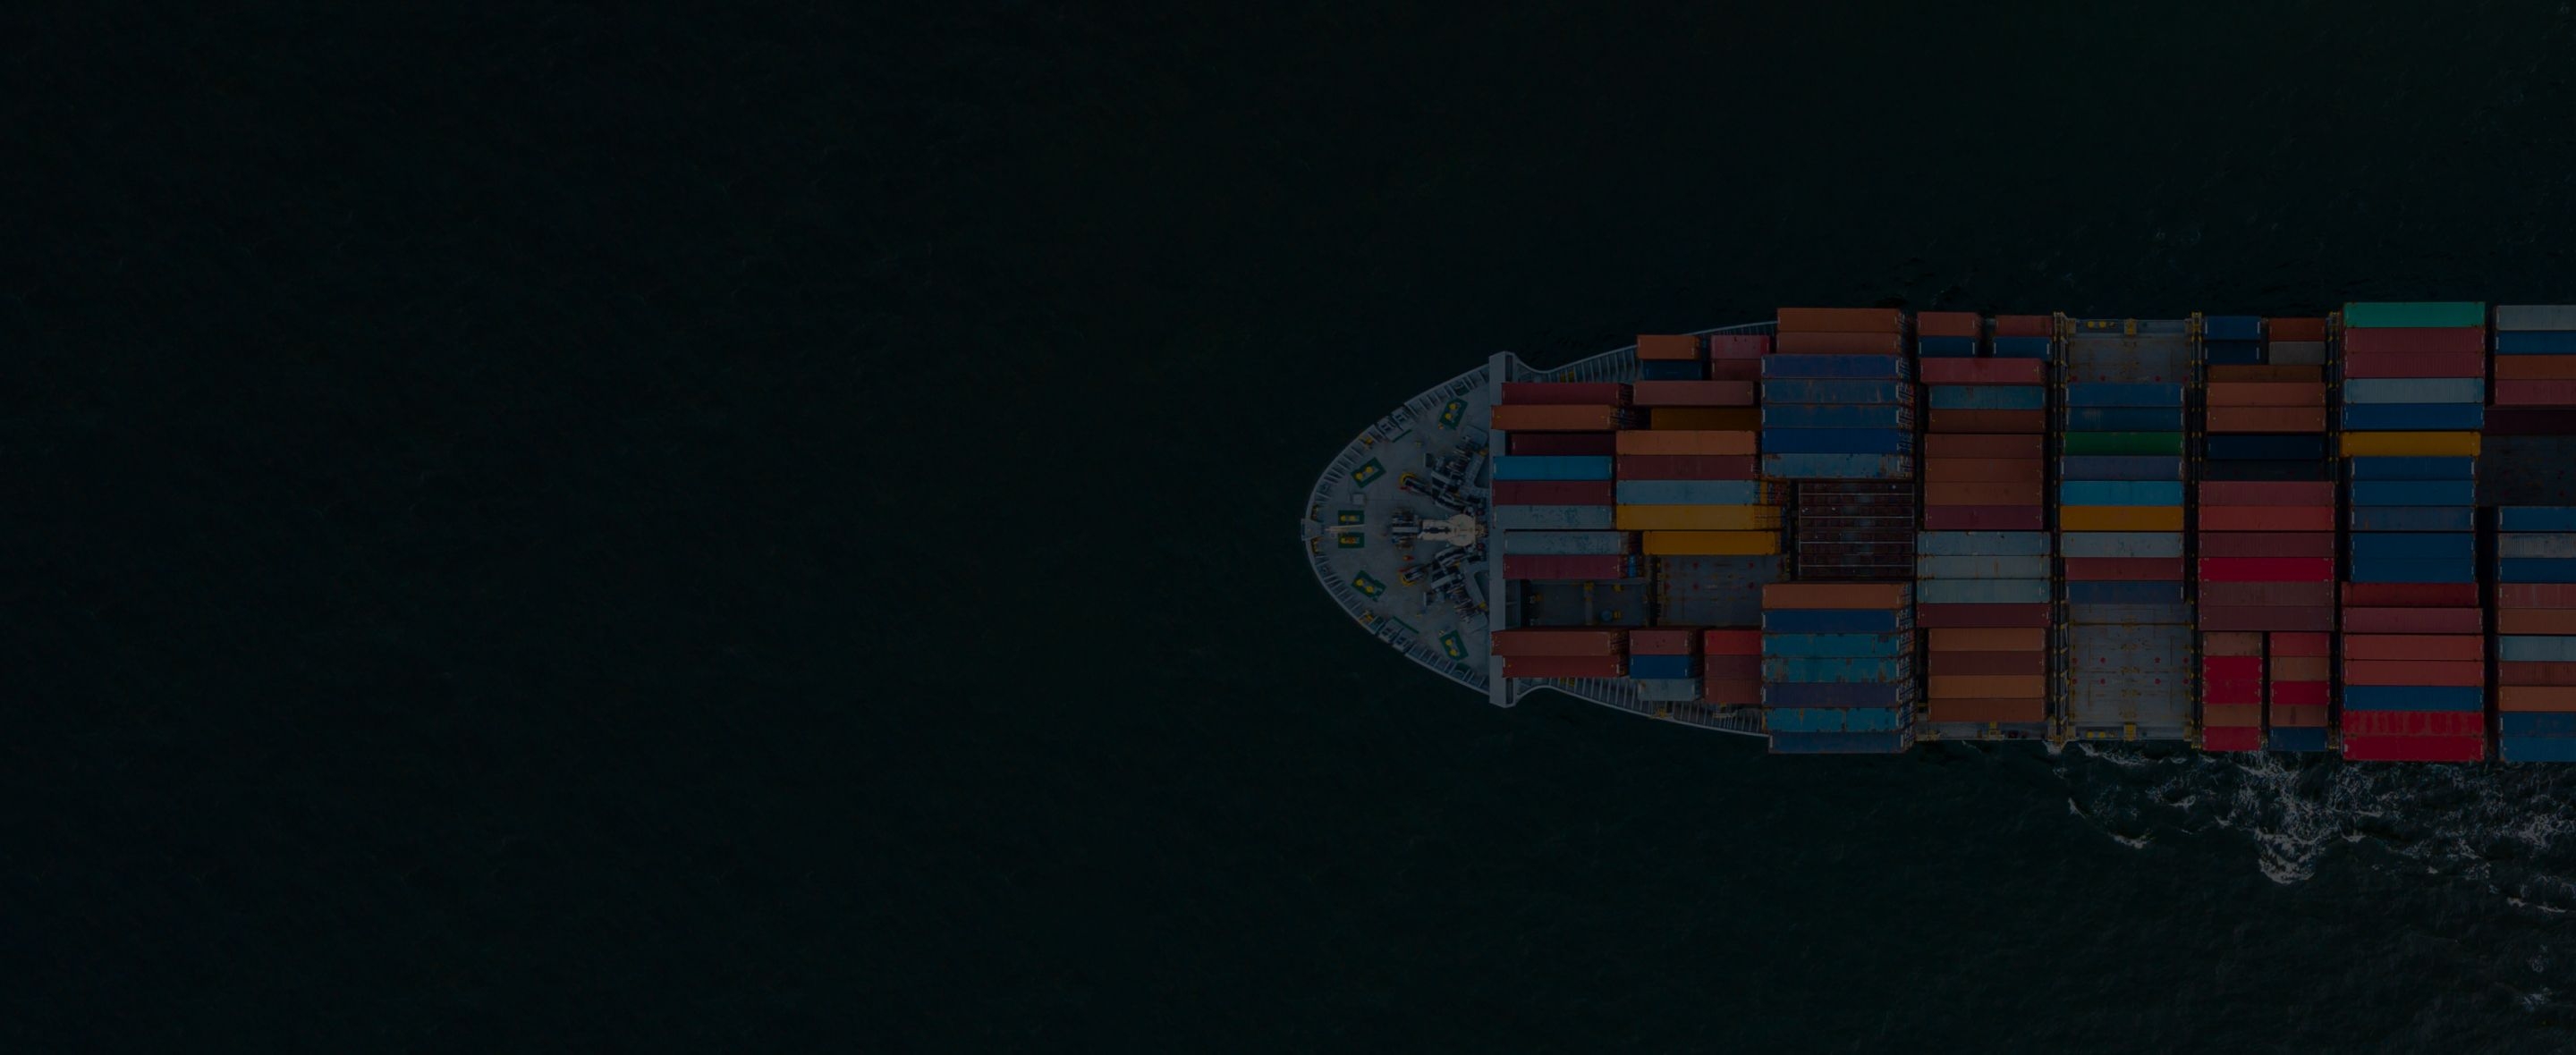 Container Shipping Blog Header.jpg